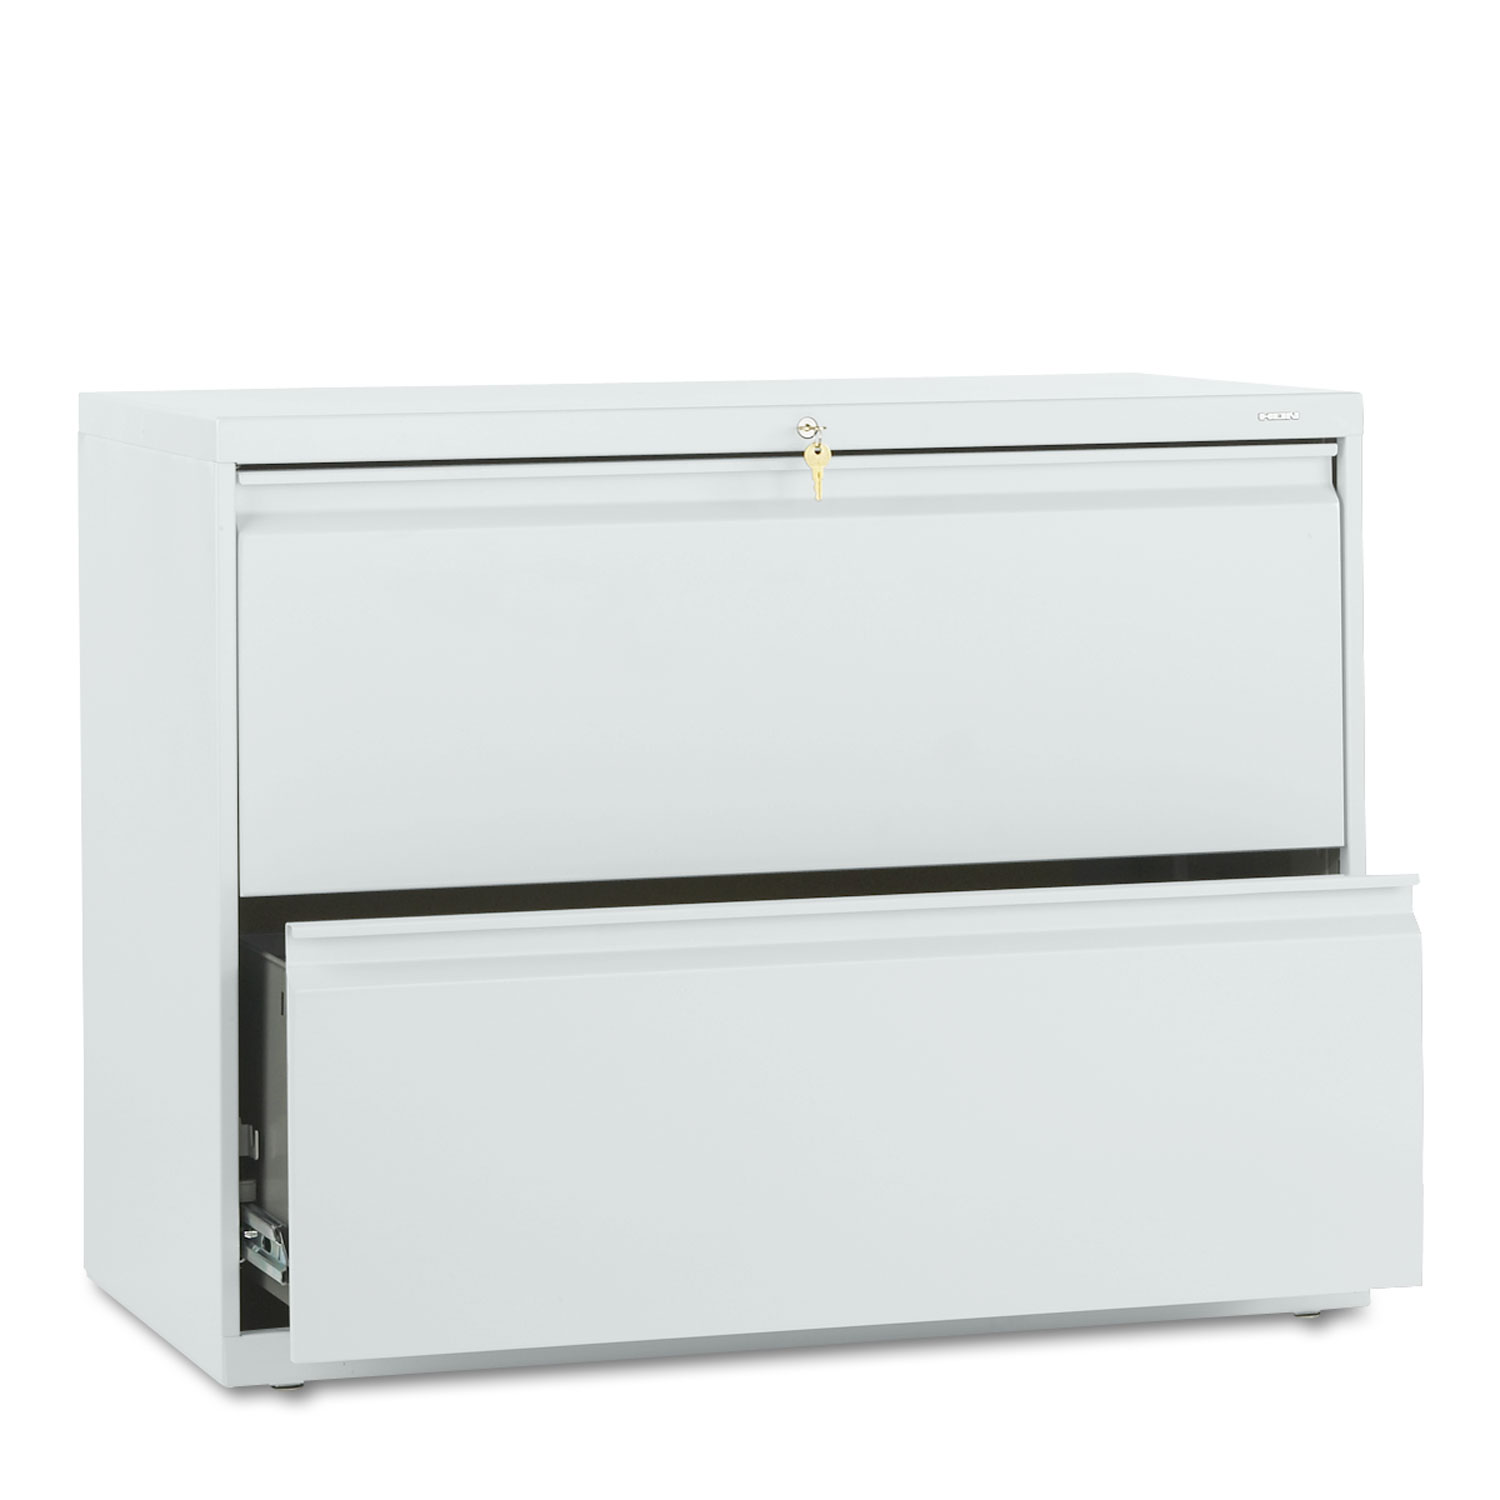 800 Series Two-Drawer Lateral File, 36w x 19-1/4d x 28-3/8h, Light Gray